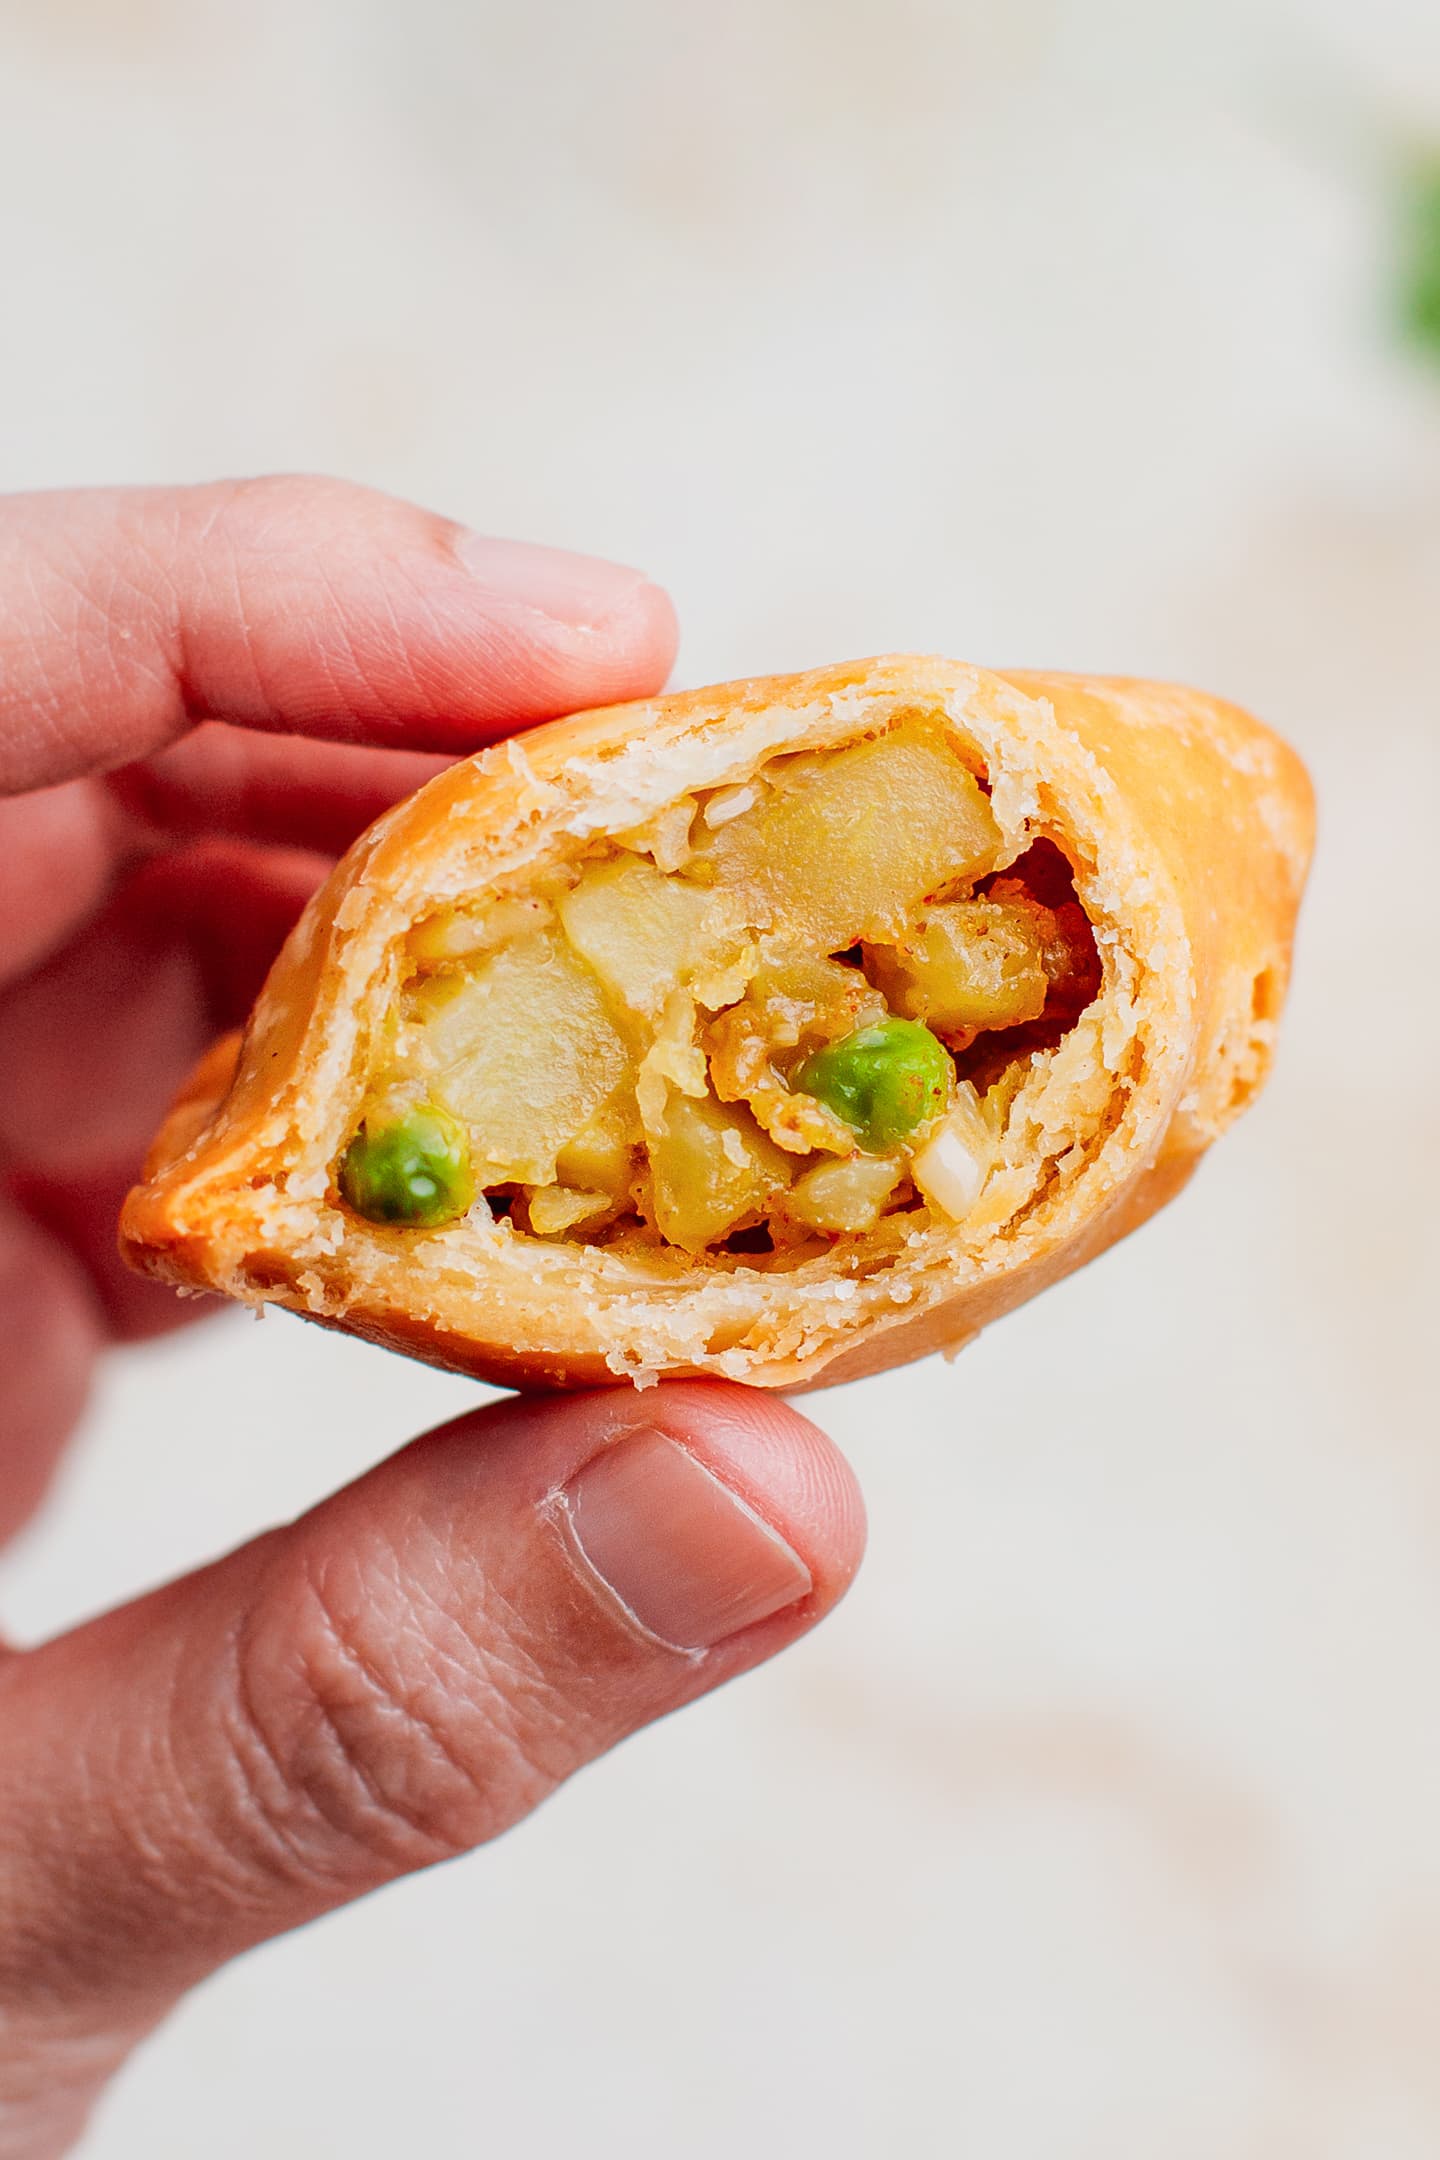 Close-up photo of the filling of a samosa.